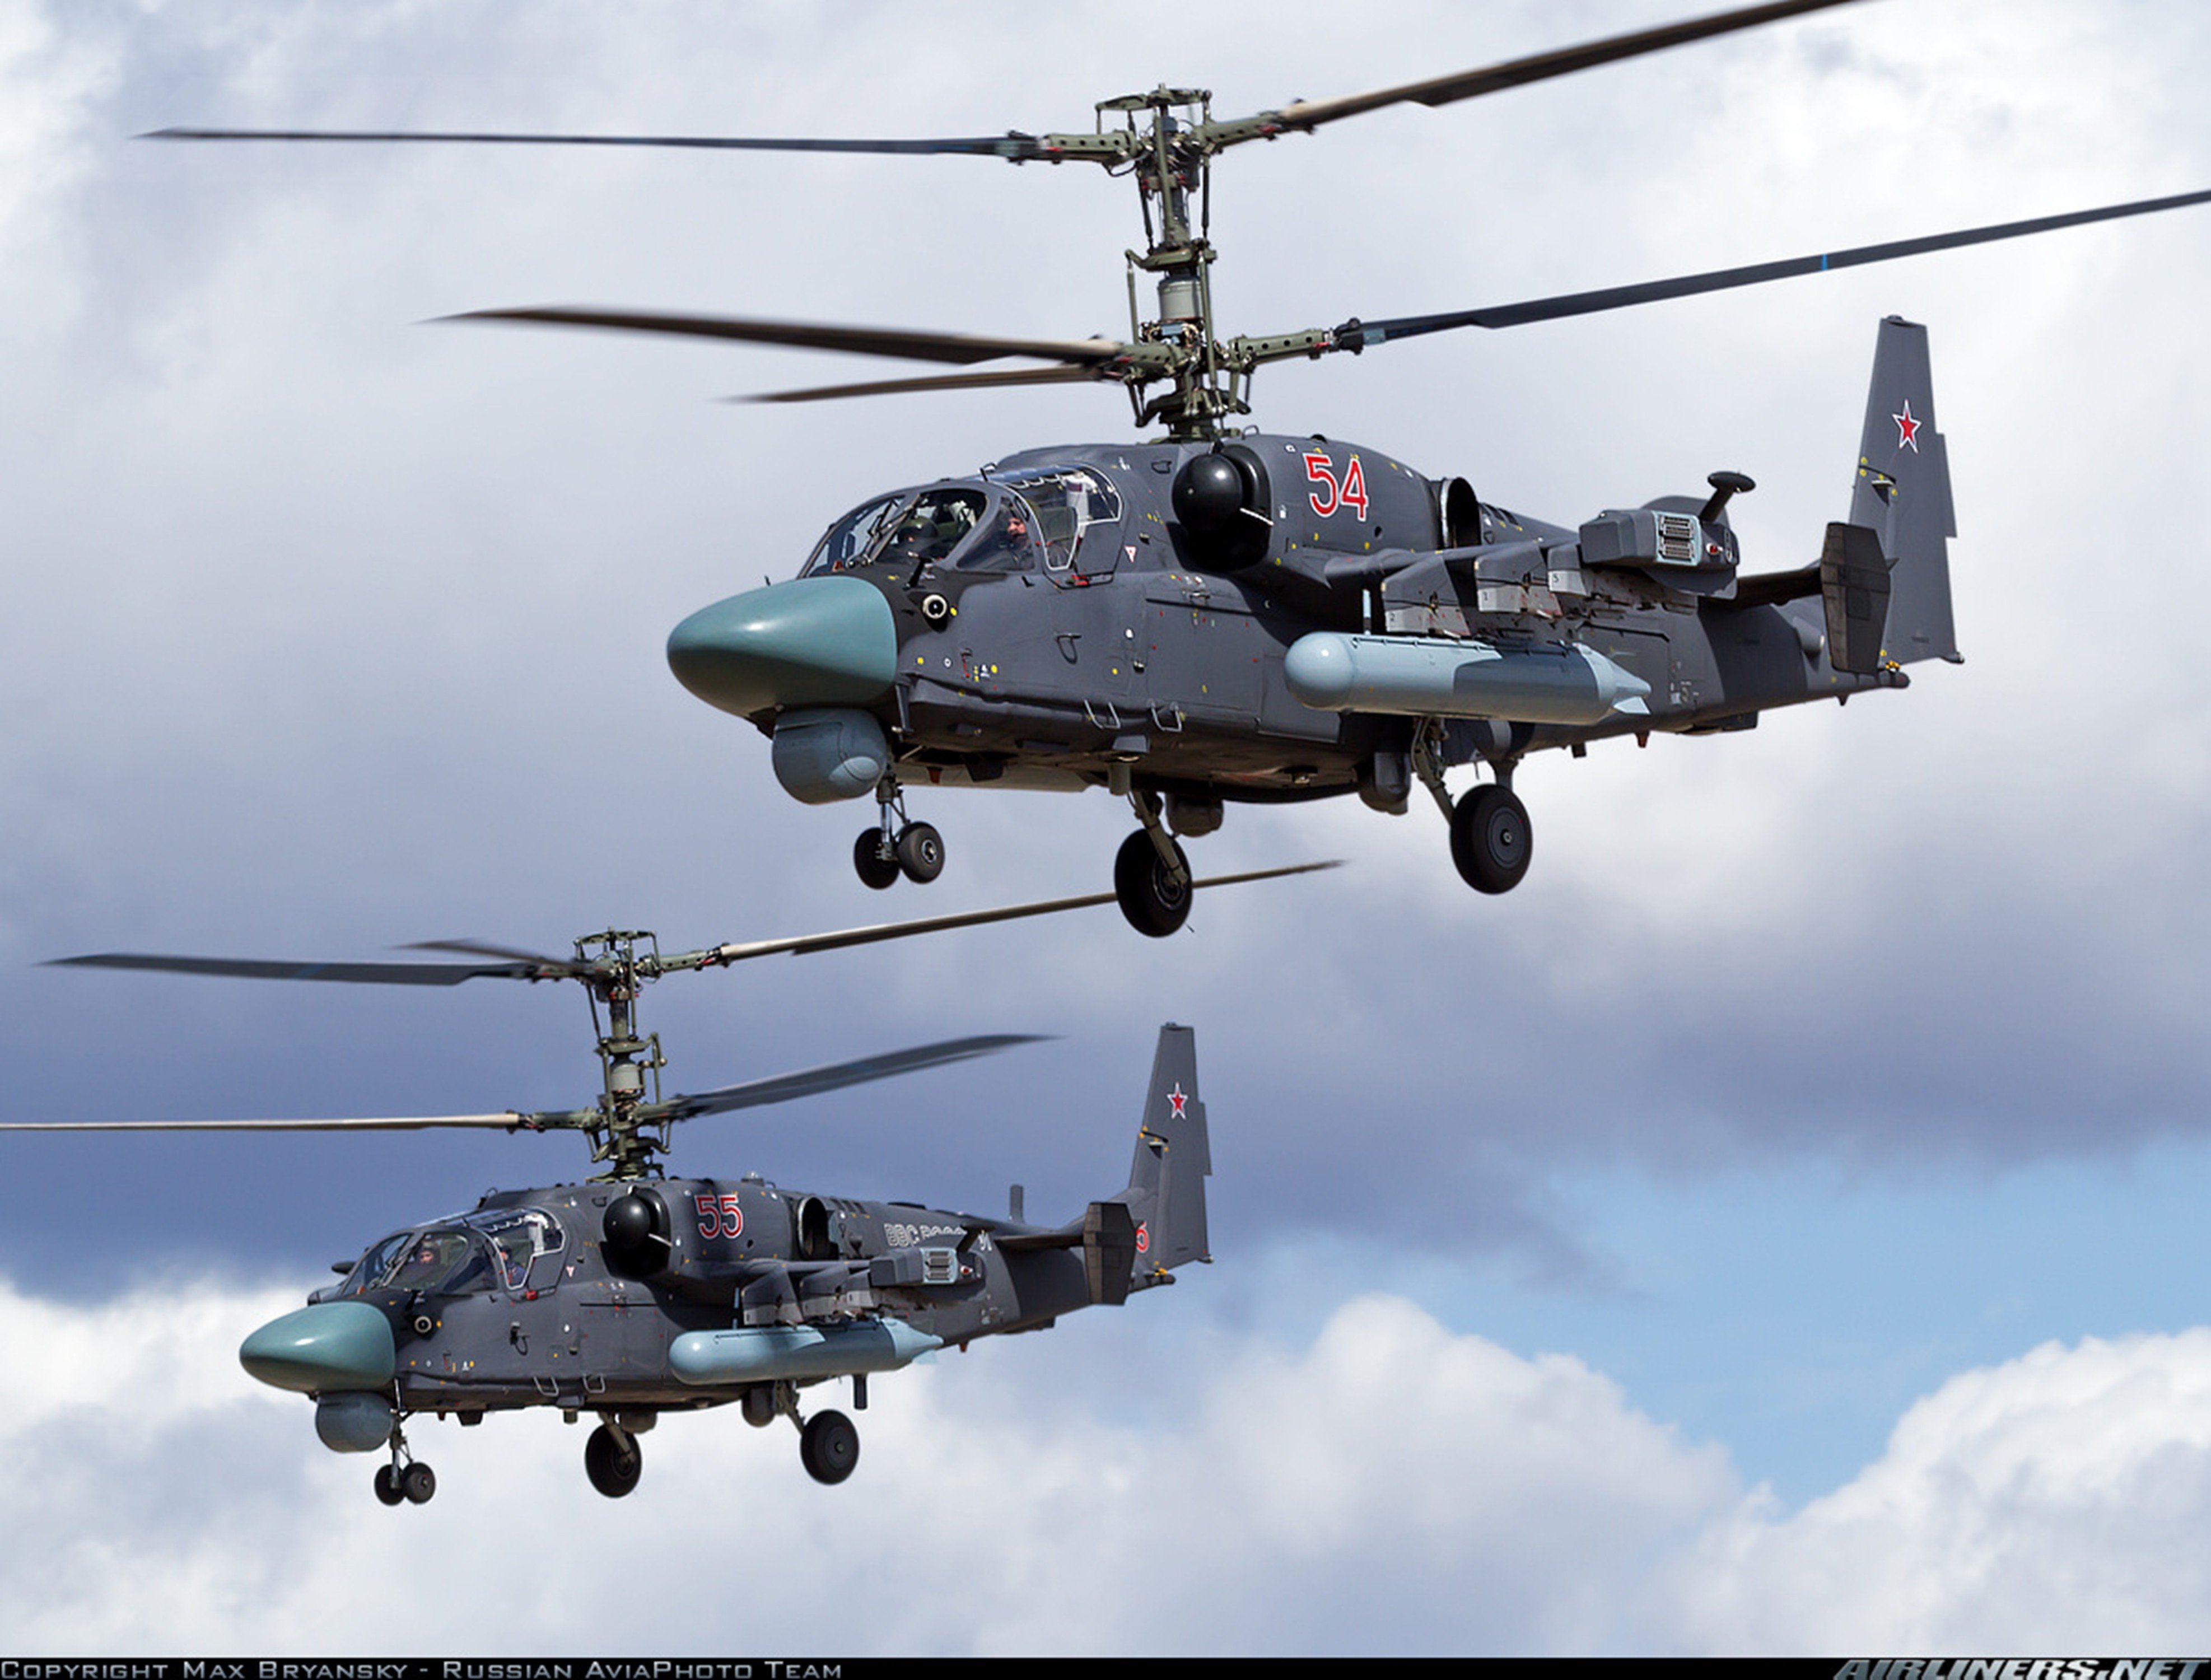 russian, Red, Star, Russia, Helicopter, Aircraftkamov, Ka 52, Alligator, Attack, Military, Army Wallpaper